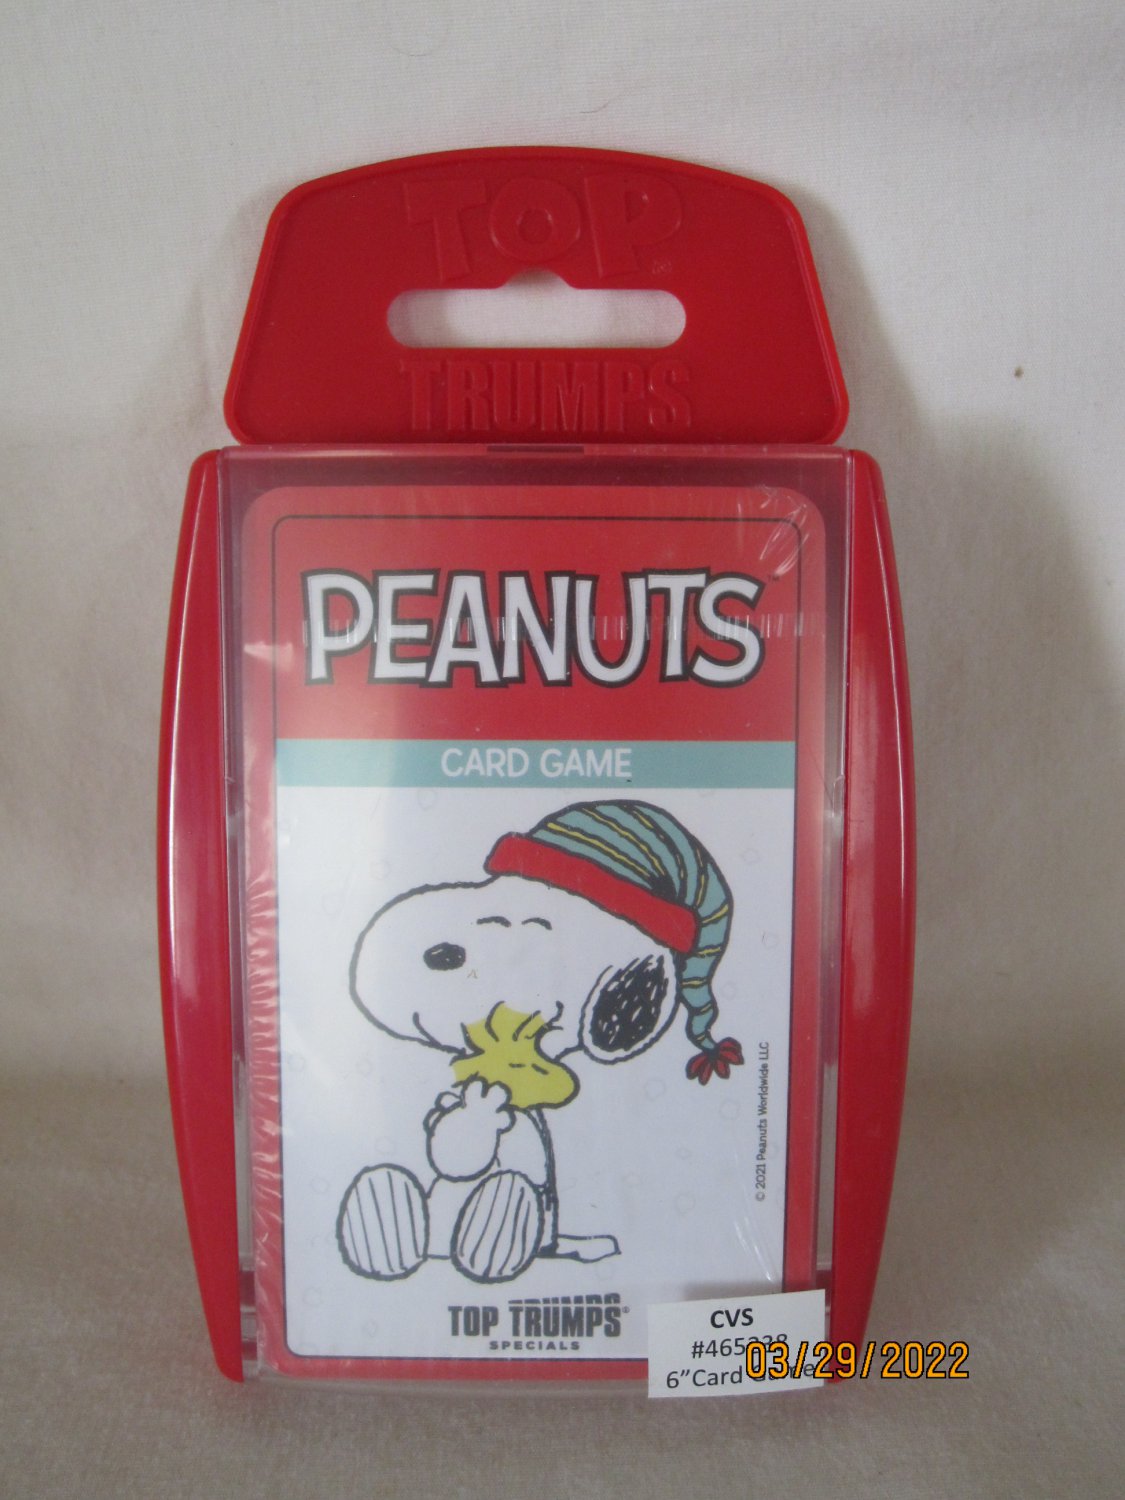 2021 Top Trumps Card Game: Peanuts / Snoopy - Brand New / Factory Sealed